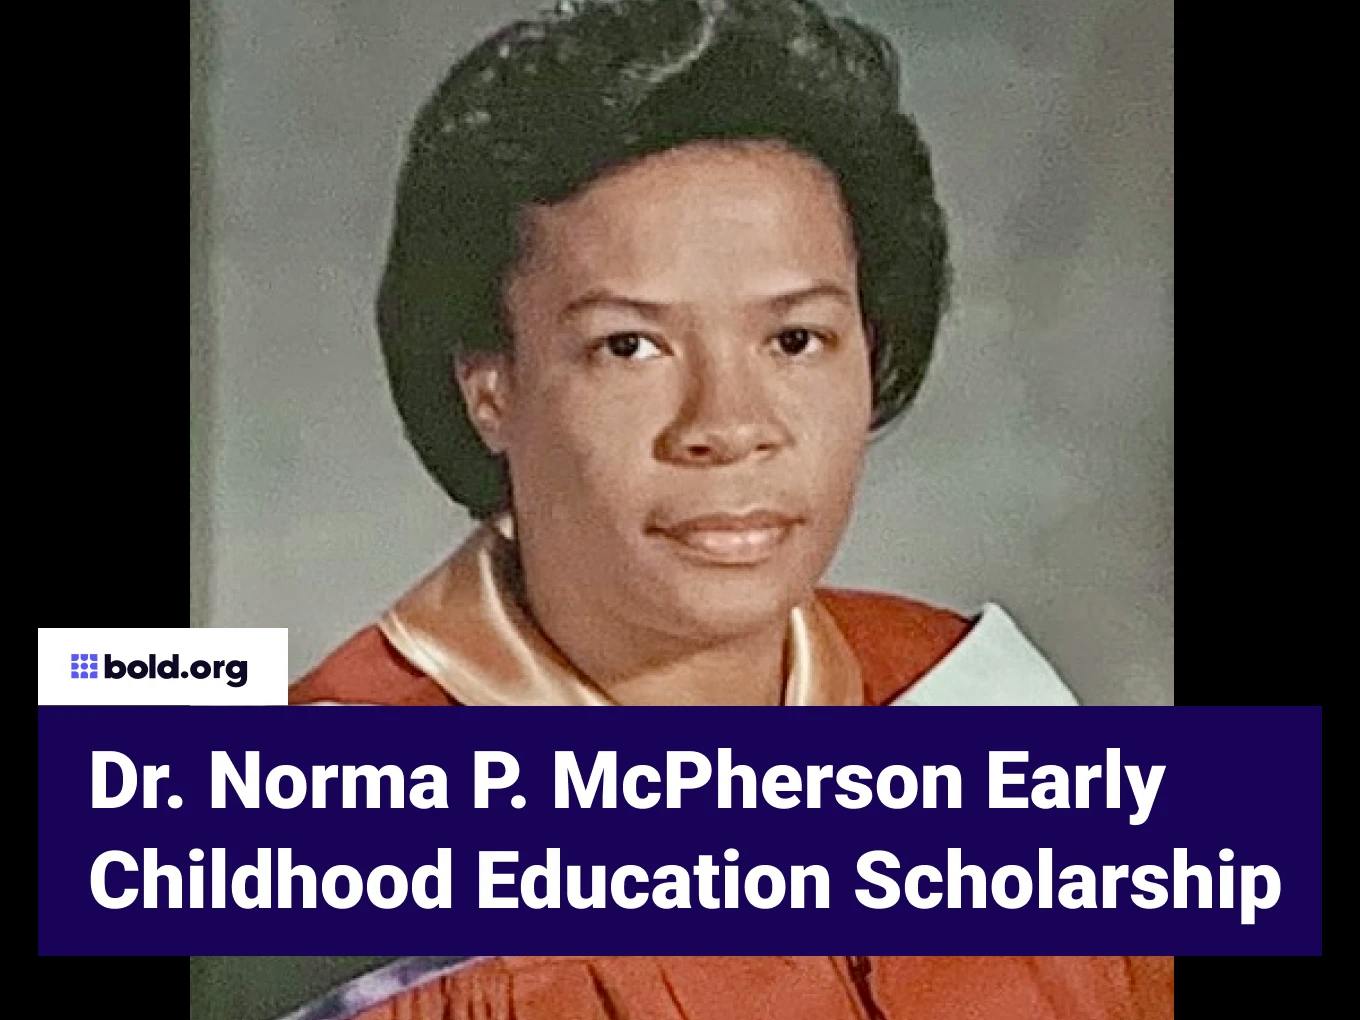 Dr. Norma P. McPherson Early Childhood Education Scholarship